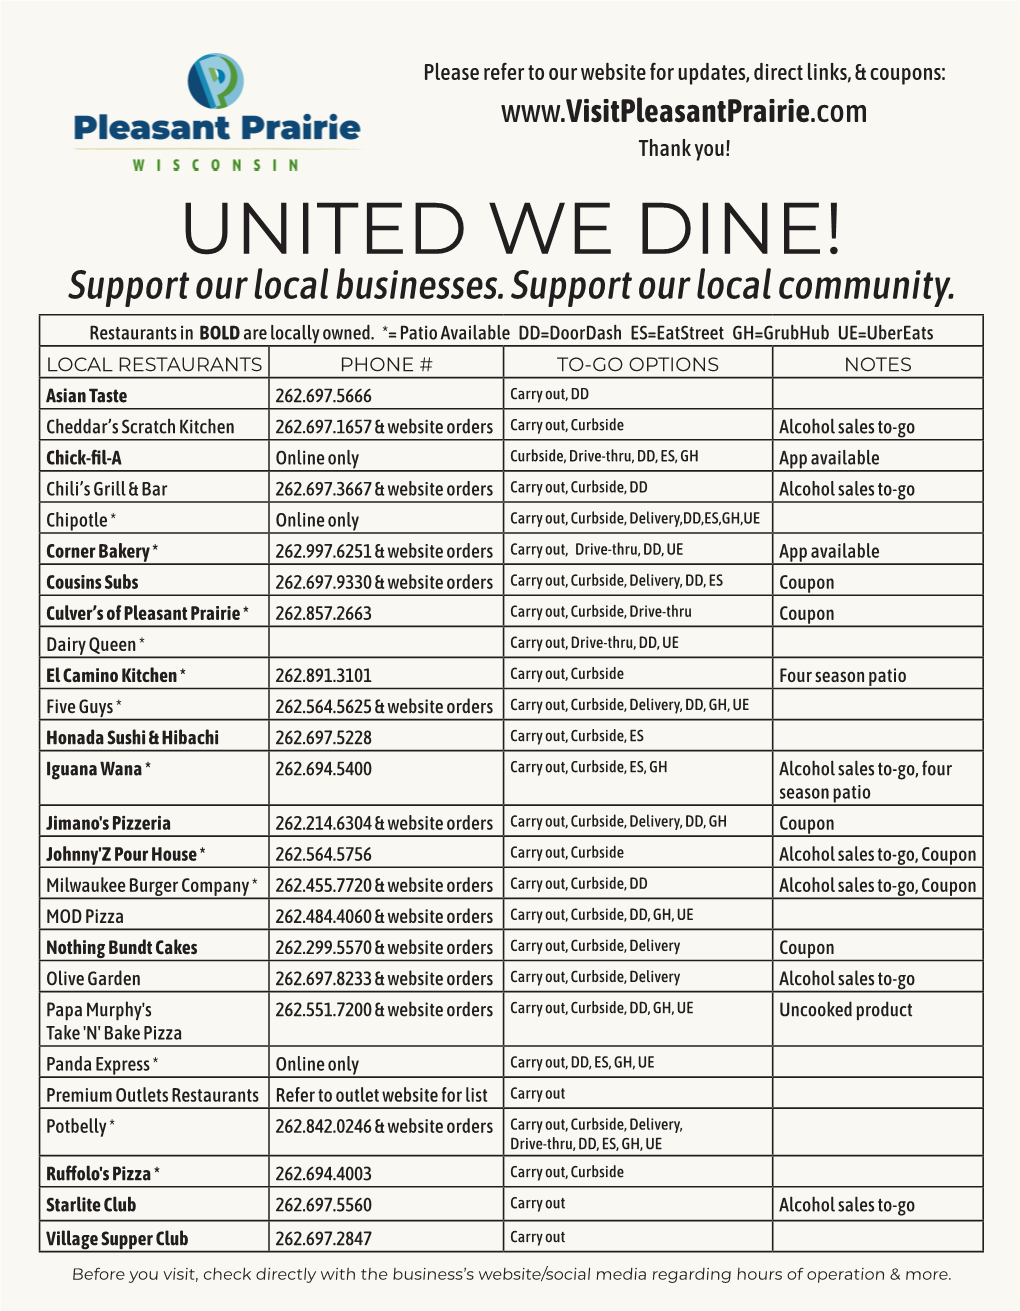 UNITED WE DINE! Support Our Local Businesses